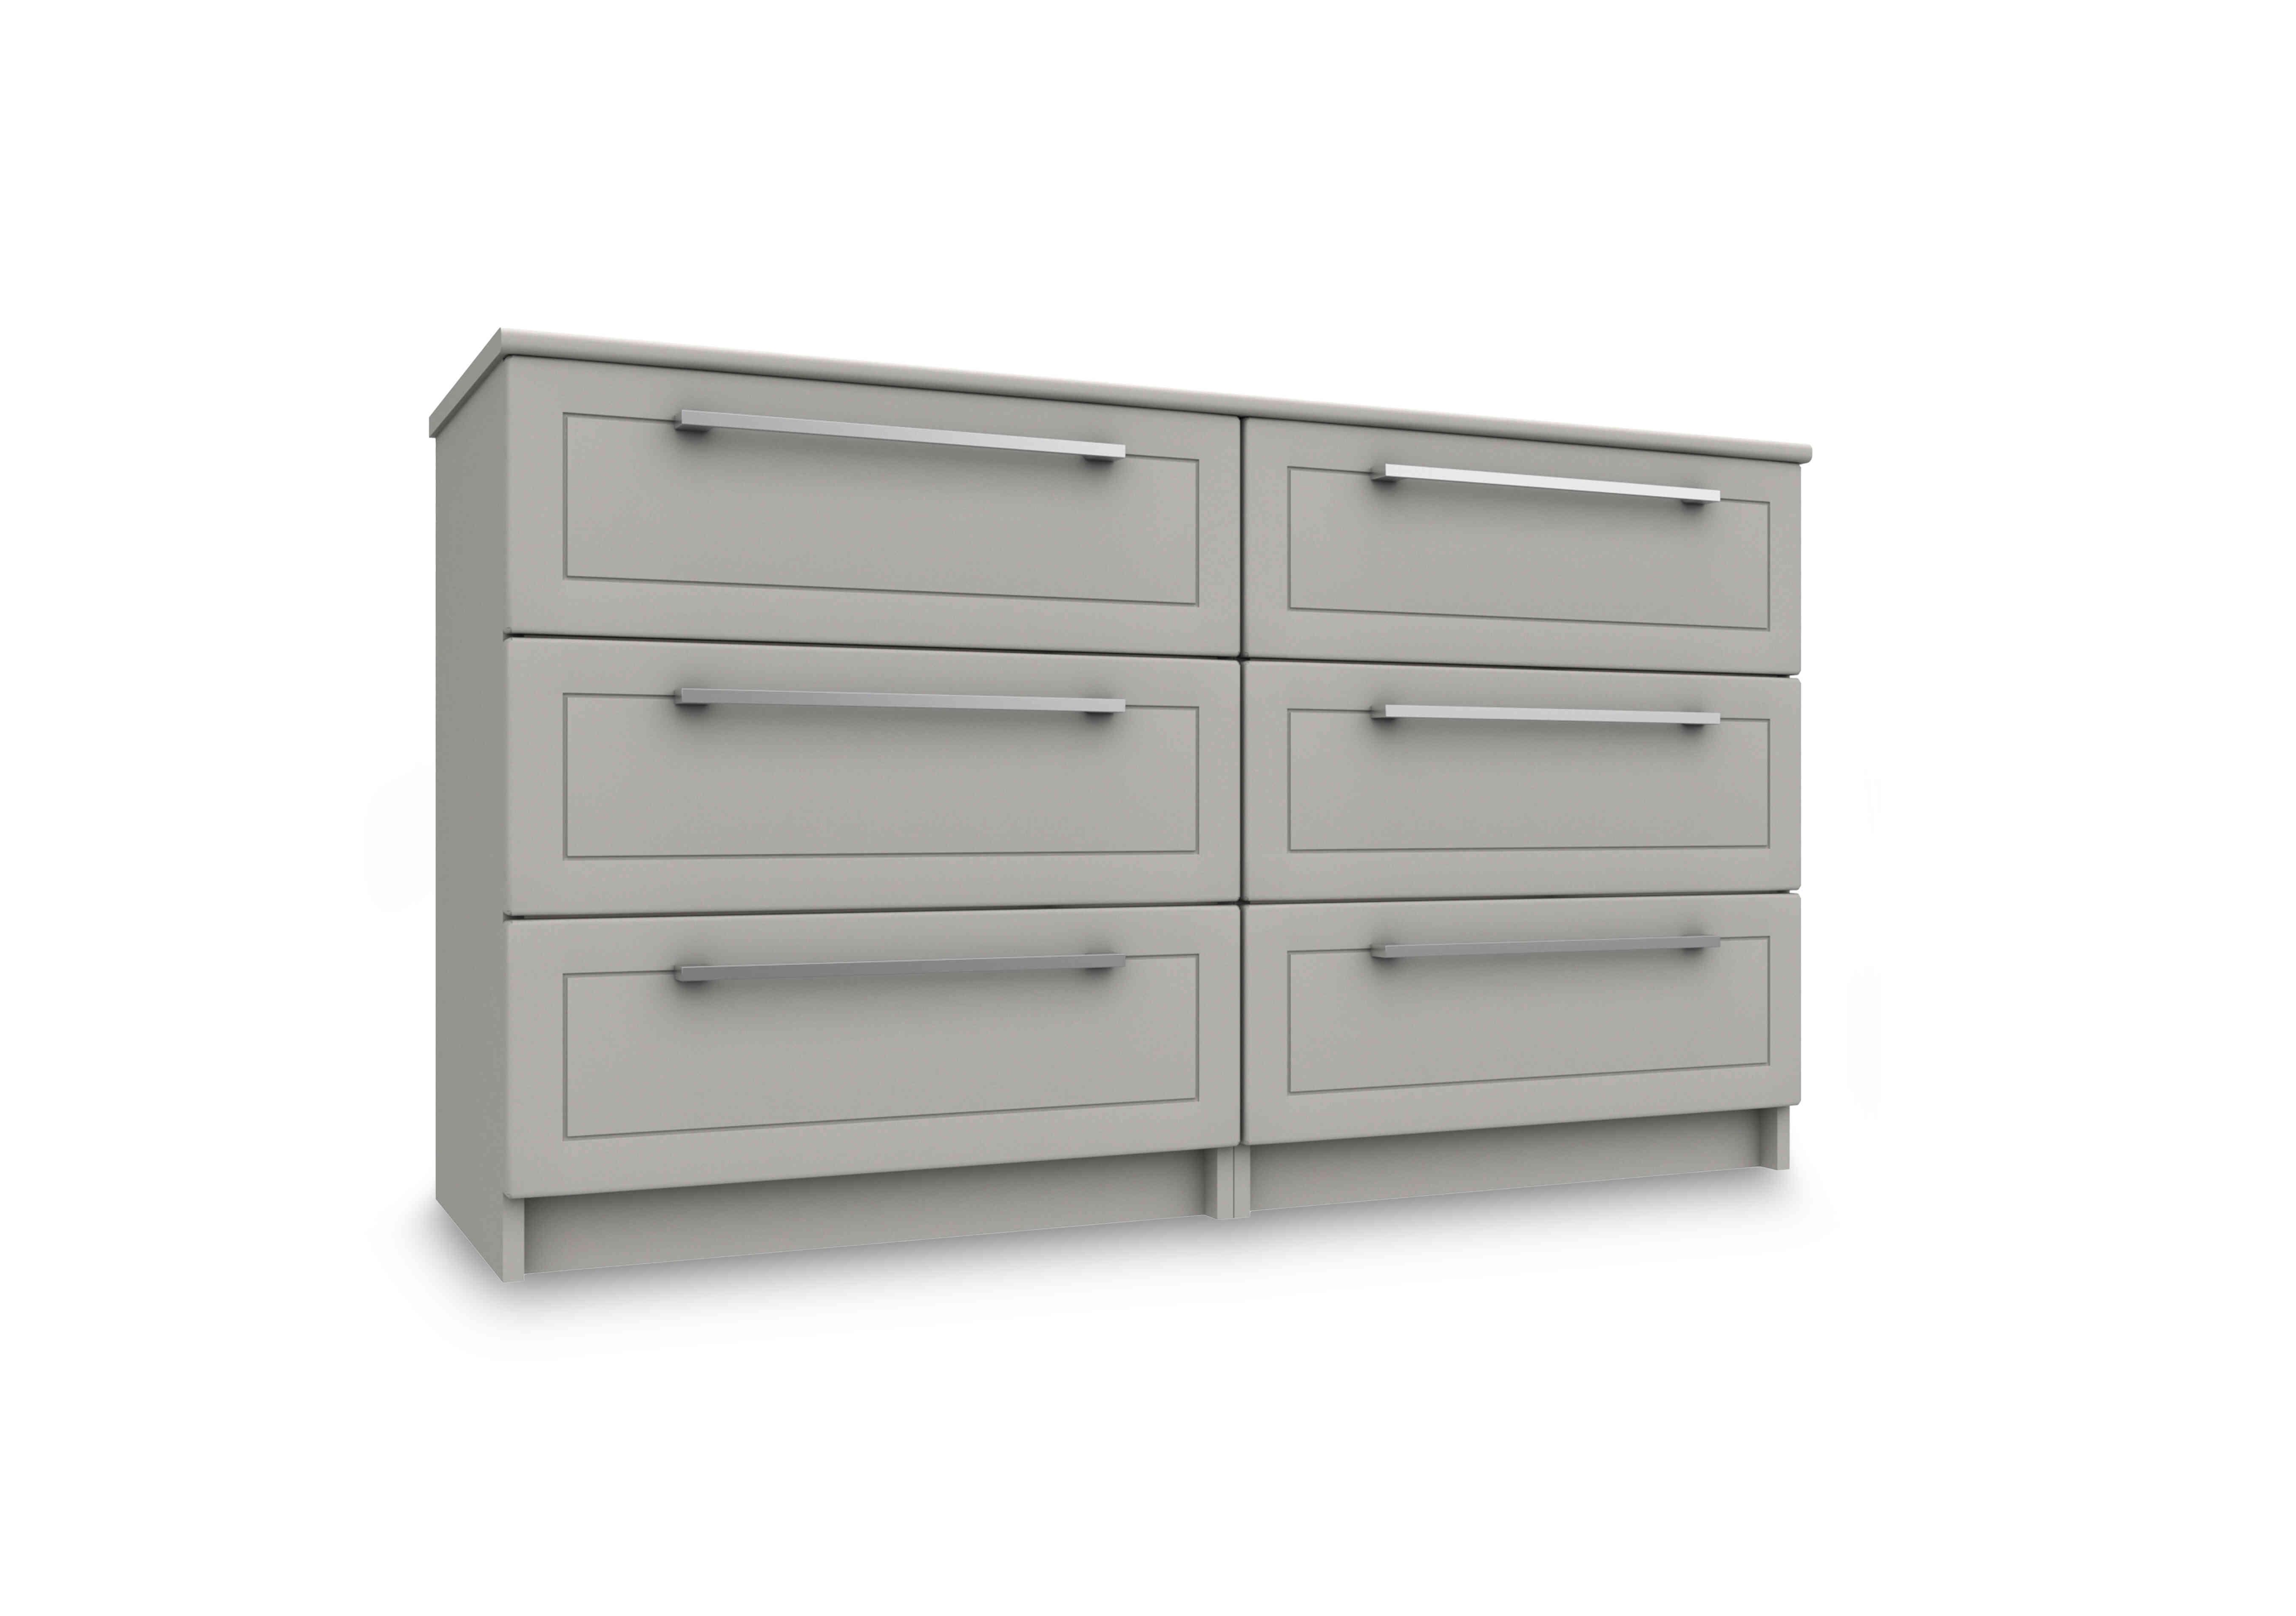 Bexley 6 Drawer Chest in Light Grey Gloss on Furniture Village